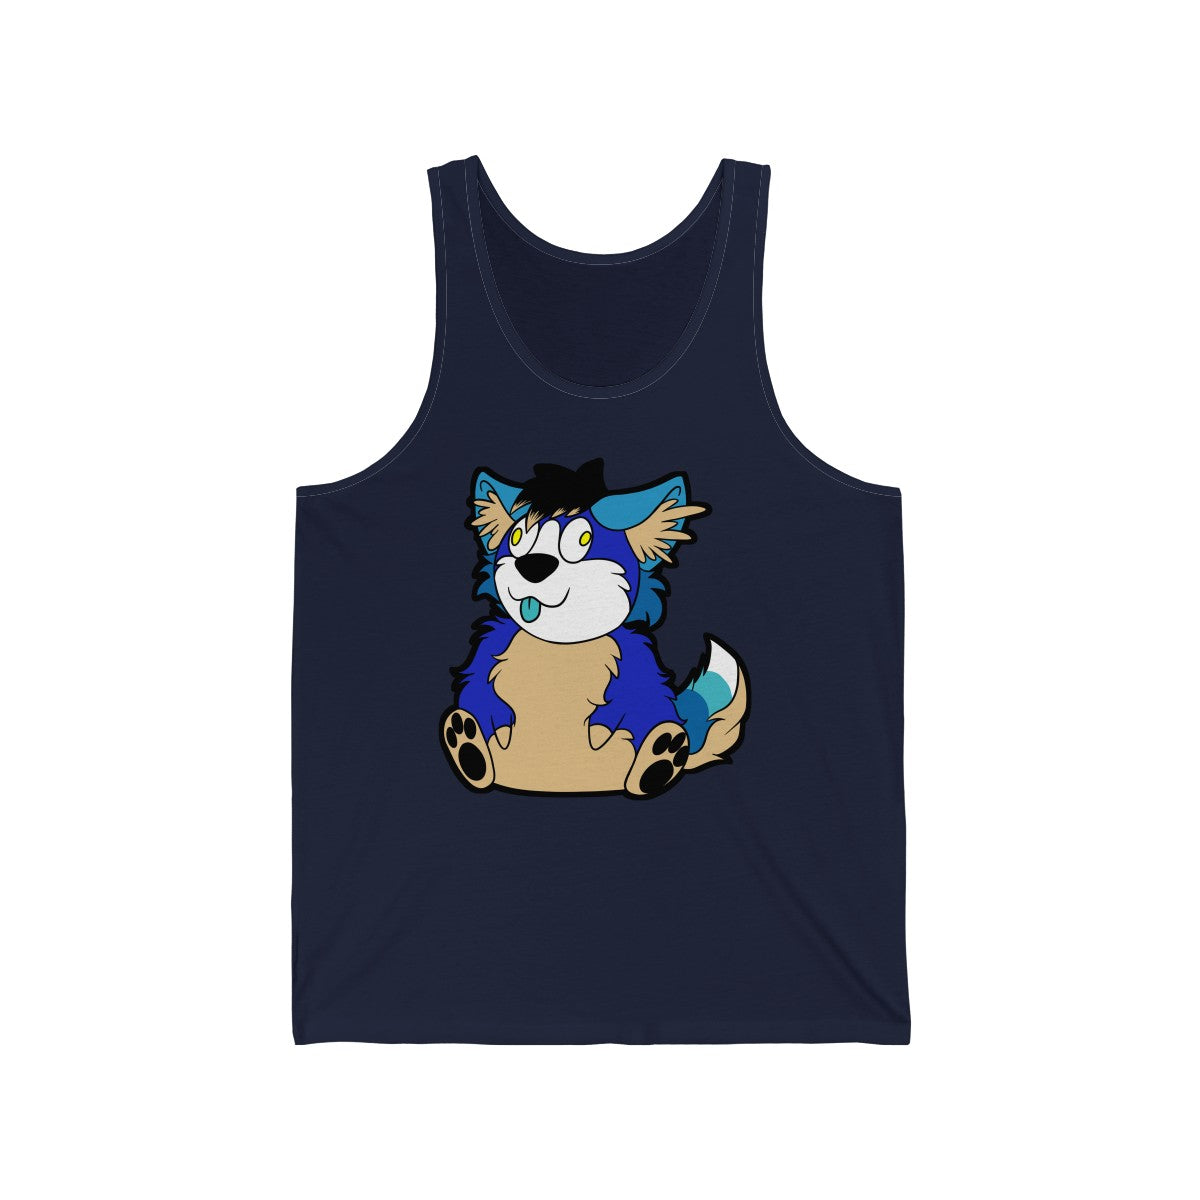 Thicc Boi No Text - Tank Top Tank Top AFLT-Hund The Hound Navy Blue XS 